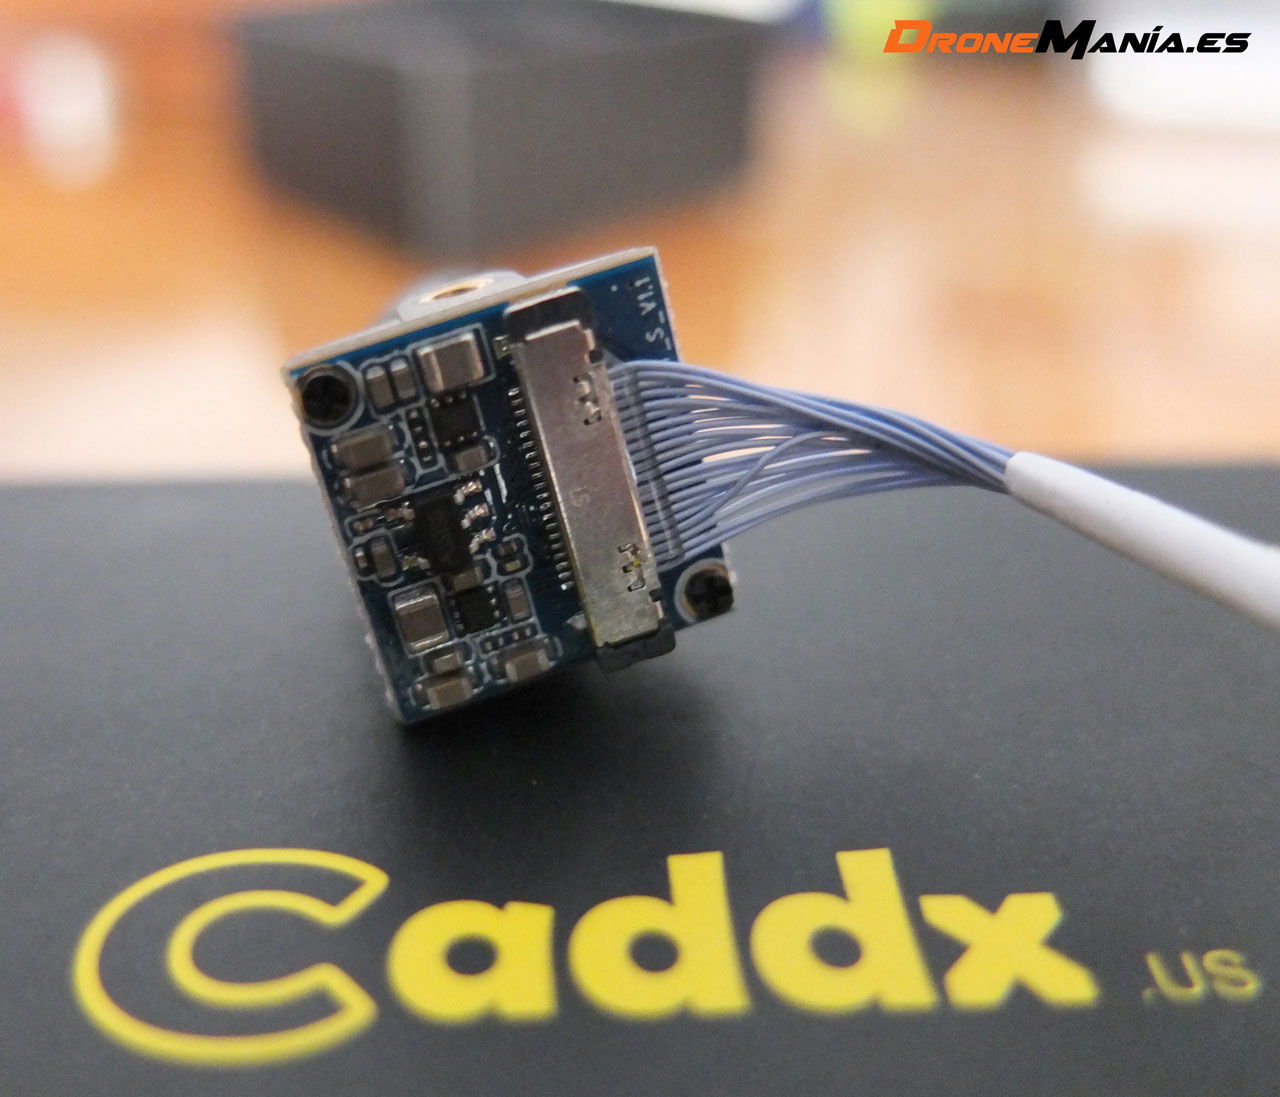 Caddx Baby Turtle Whoop Edition